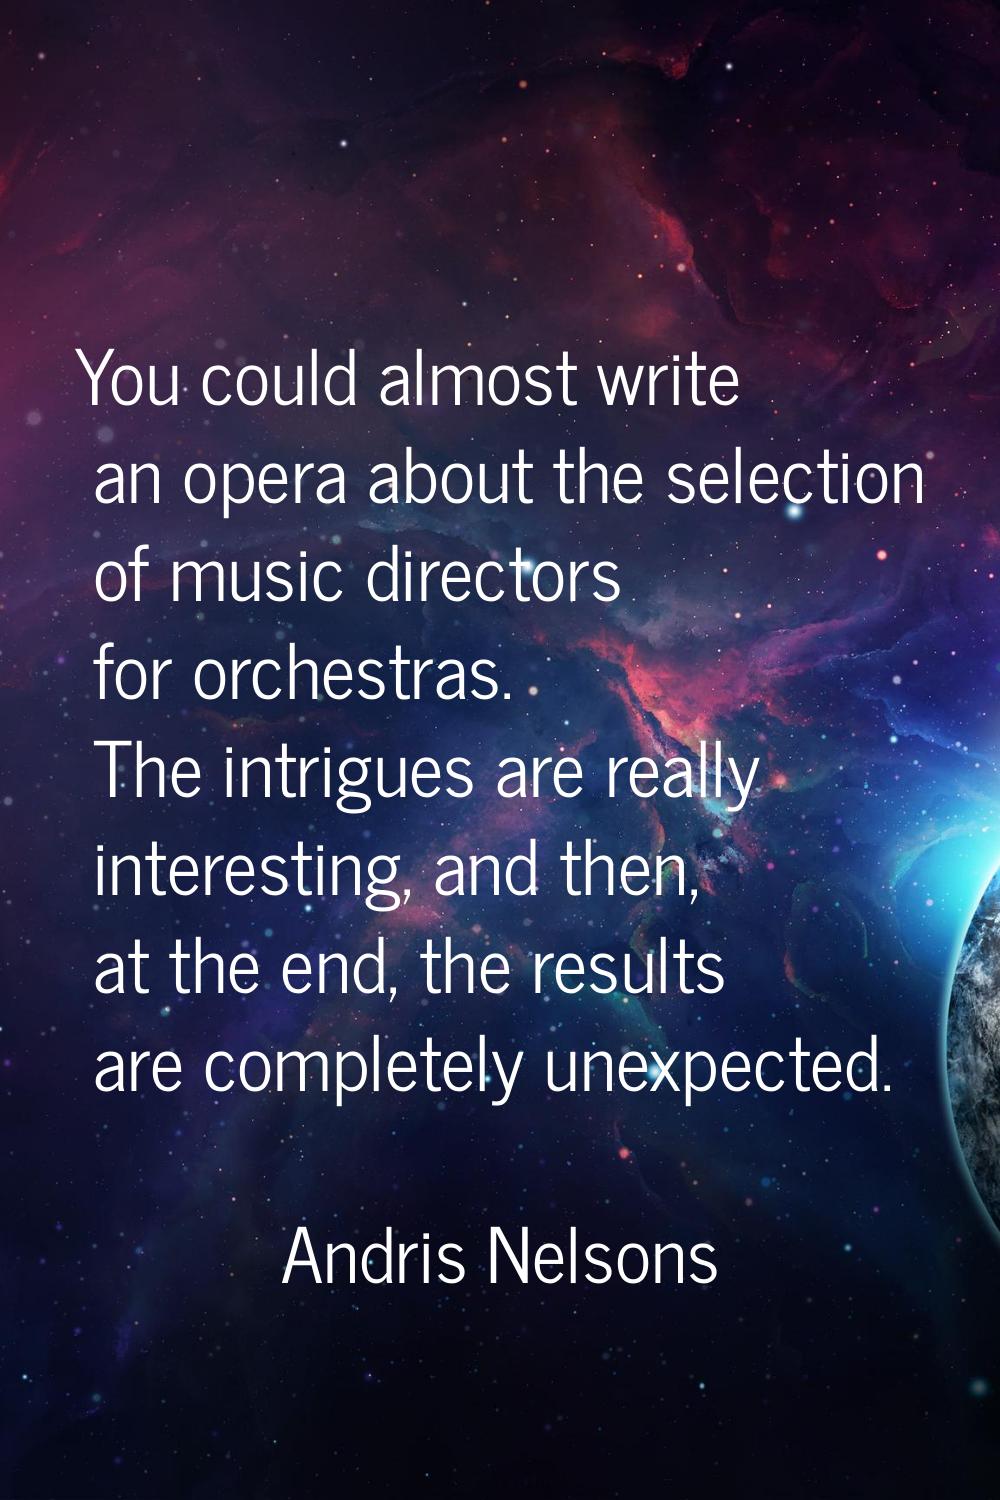 You could almost write an opera about the selection of music directors for orchestras. The intrigue